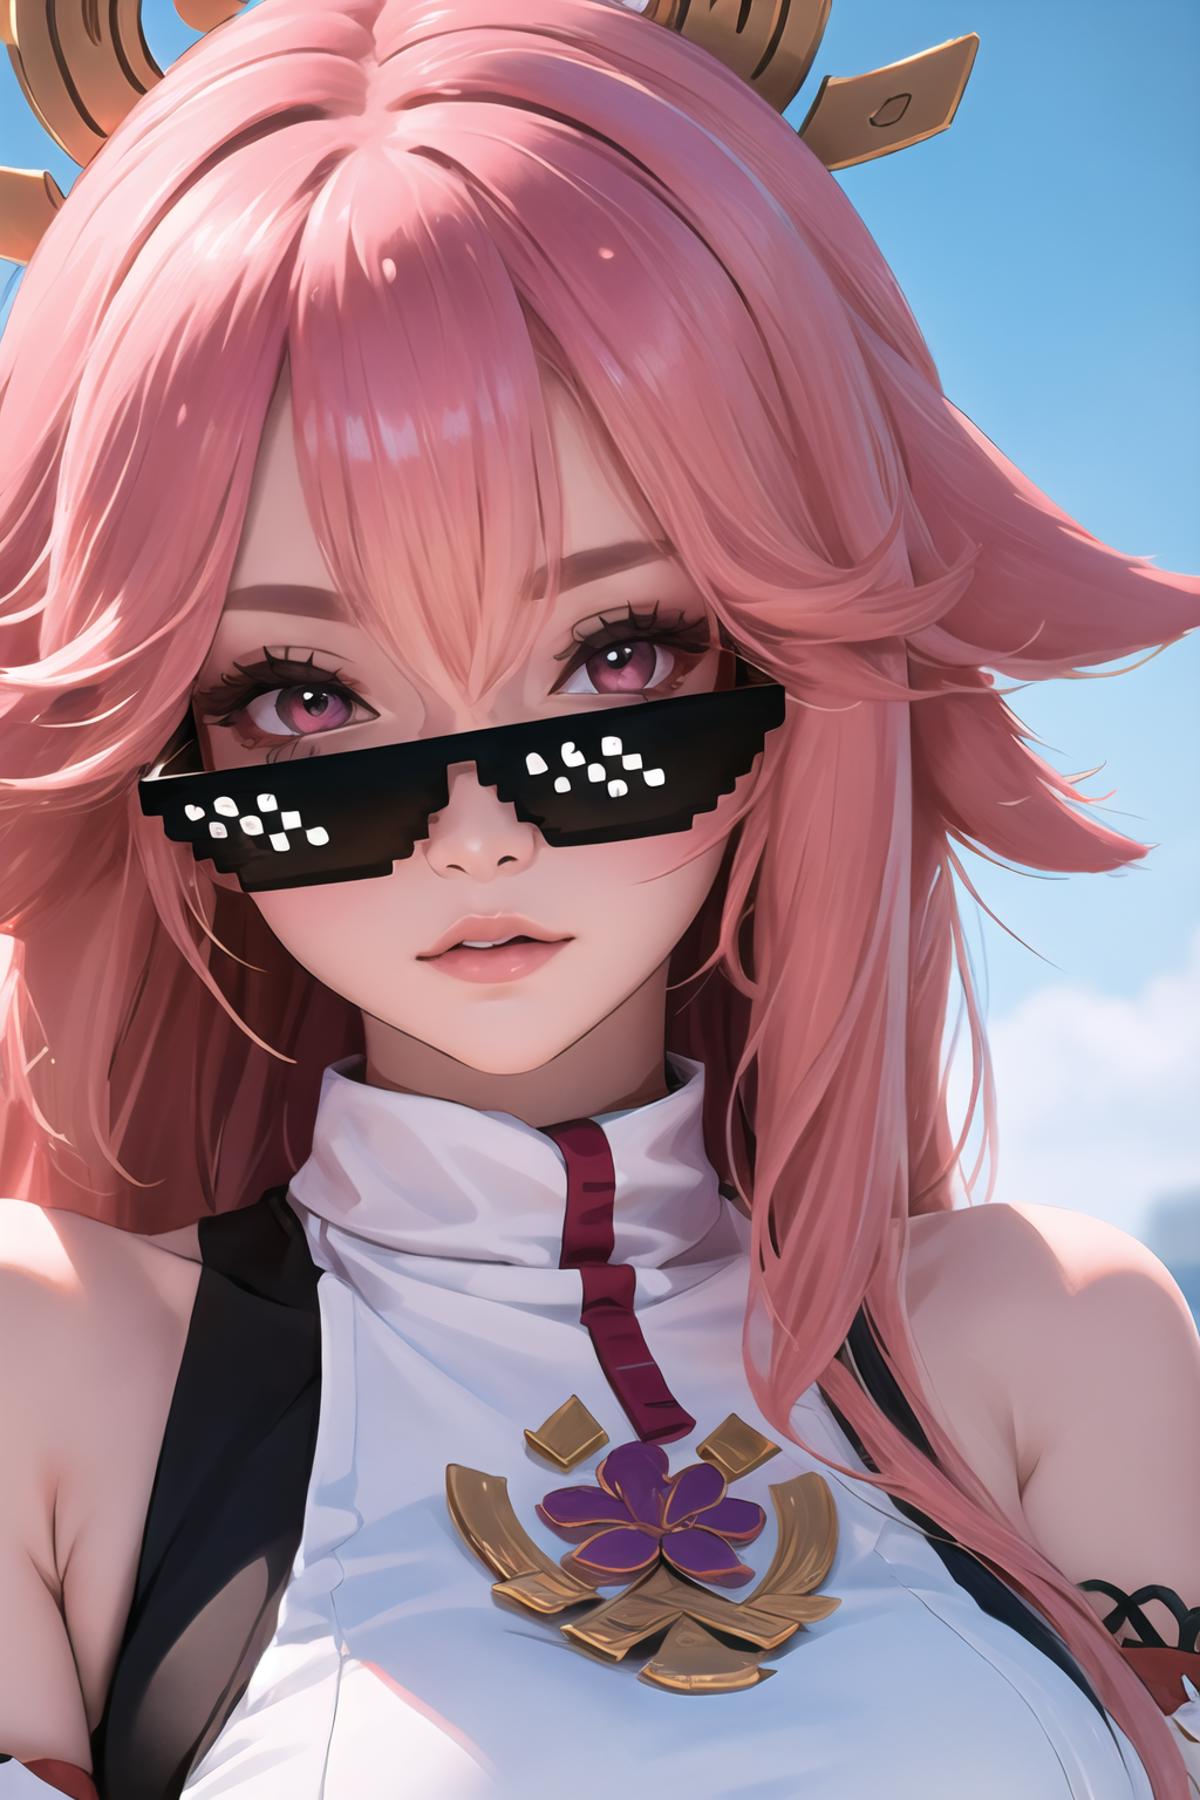 Deal with it Meme Sunglasses | Clothing/Concept LoRA image by FallenIncursio